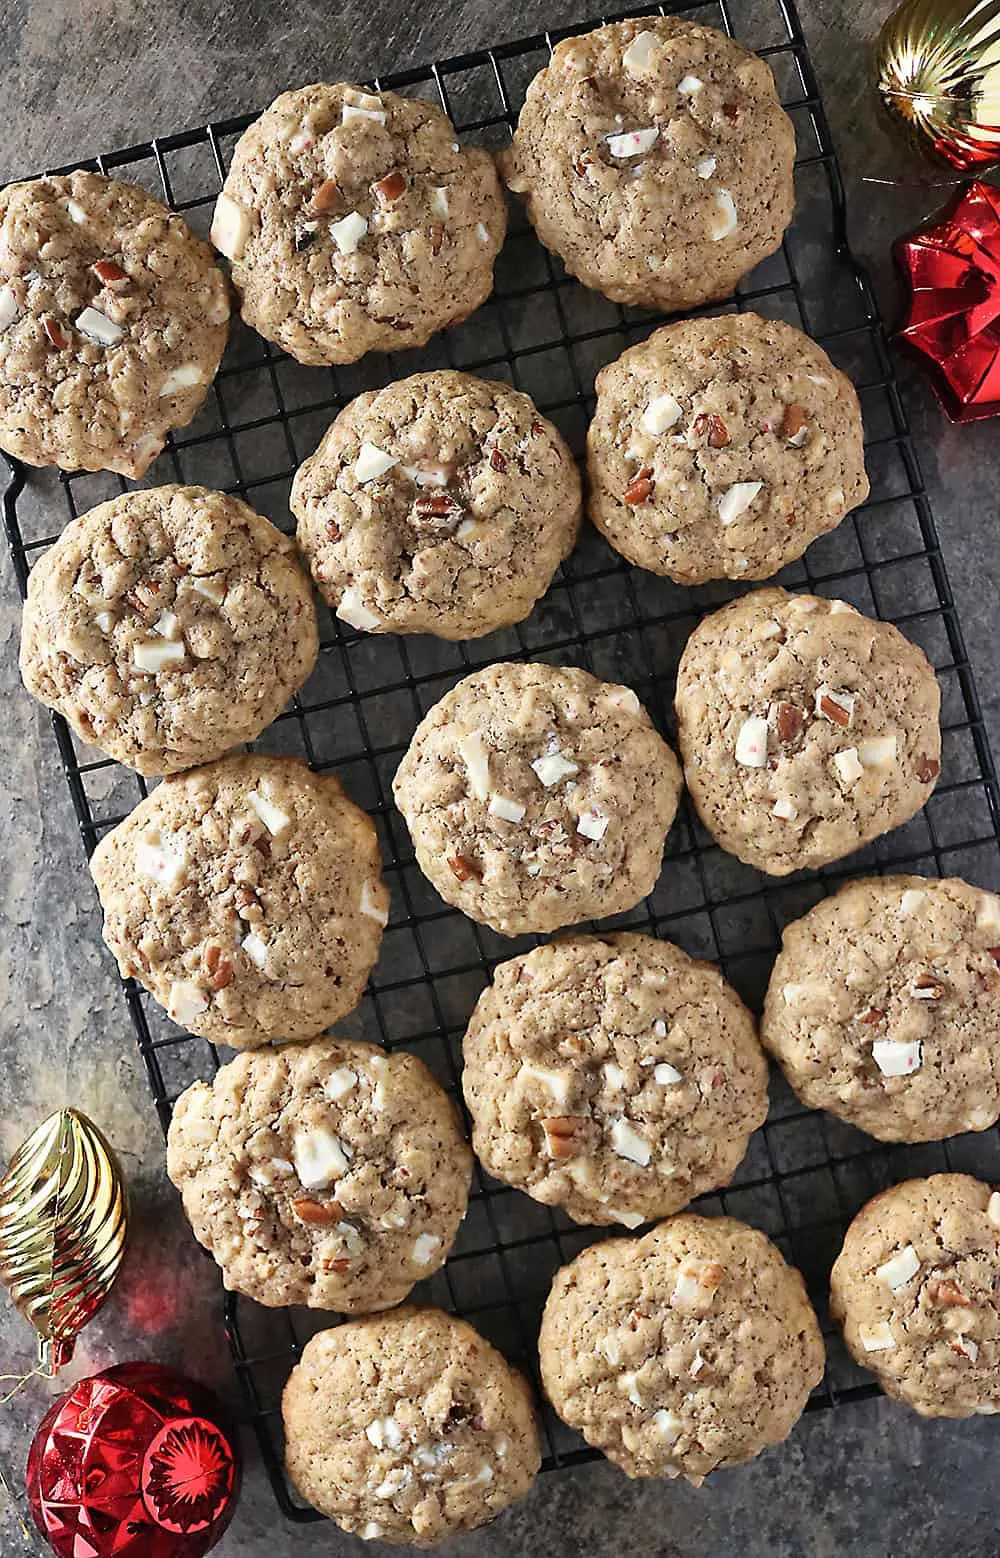 Gluten Free Peppermint Cookies are the holiday treat you can share with all your gluten-free friends! Easily the yummiest they'll have this season Image